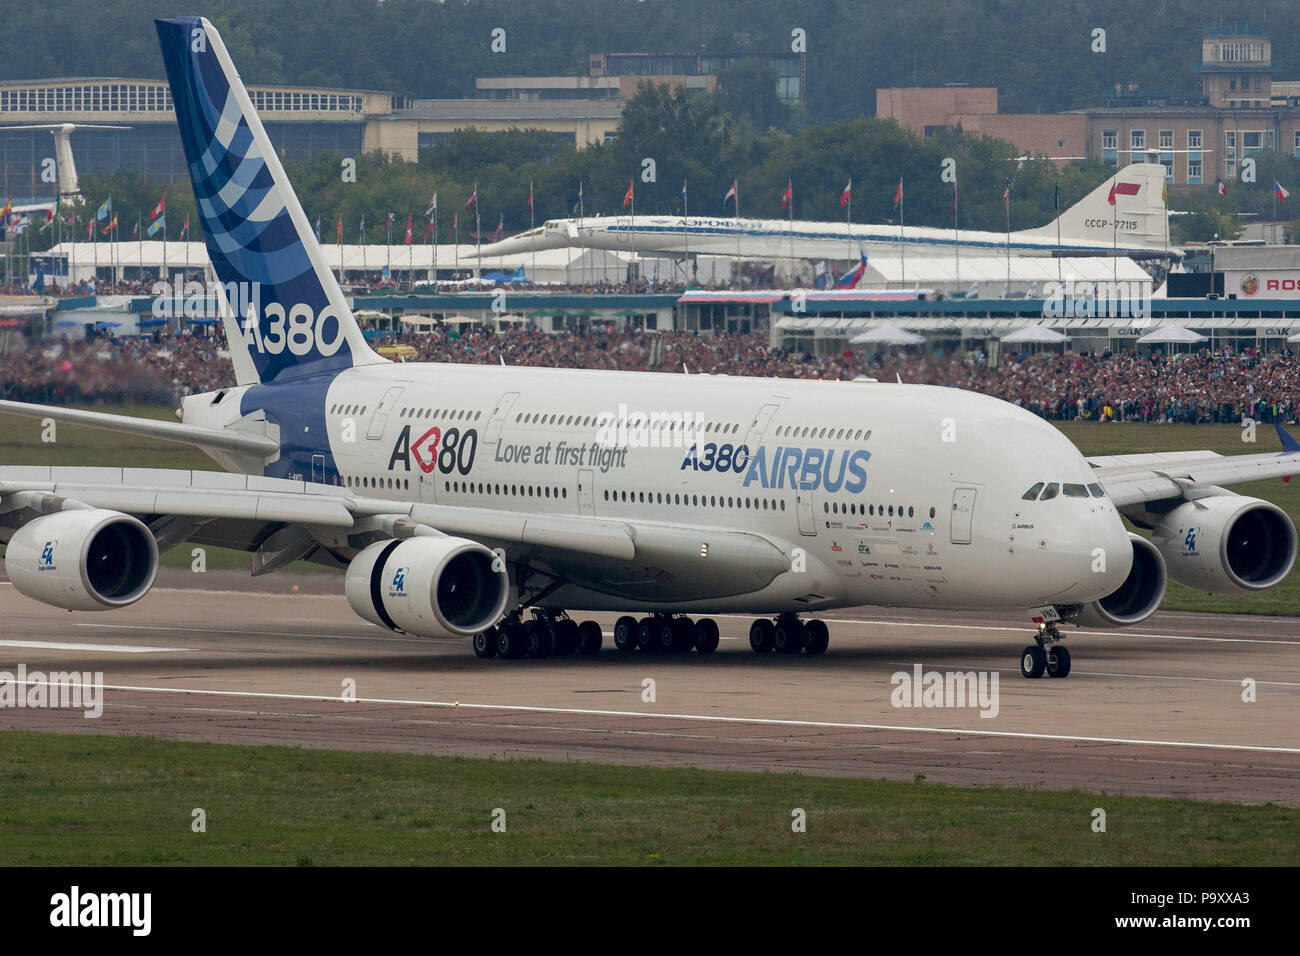 The Airbus A380 prepares to take off at MAKS-2011 airshow to perform its demonstration program. Stock Photo